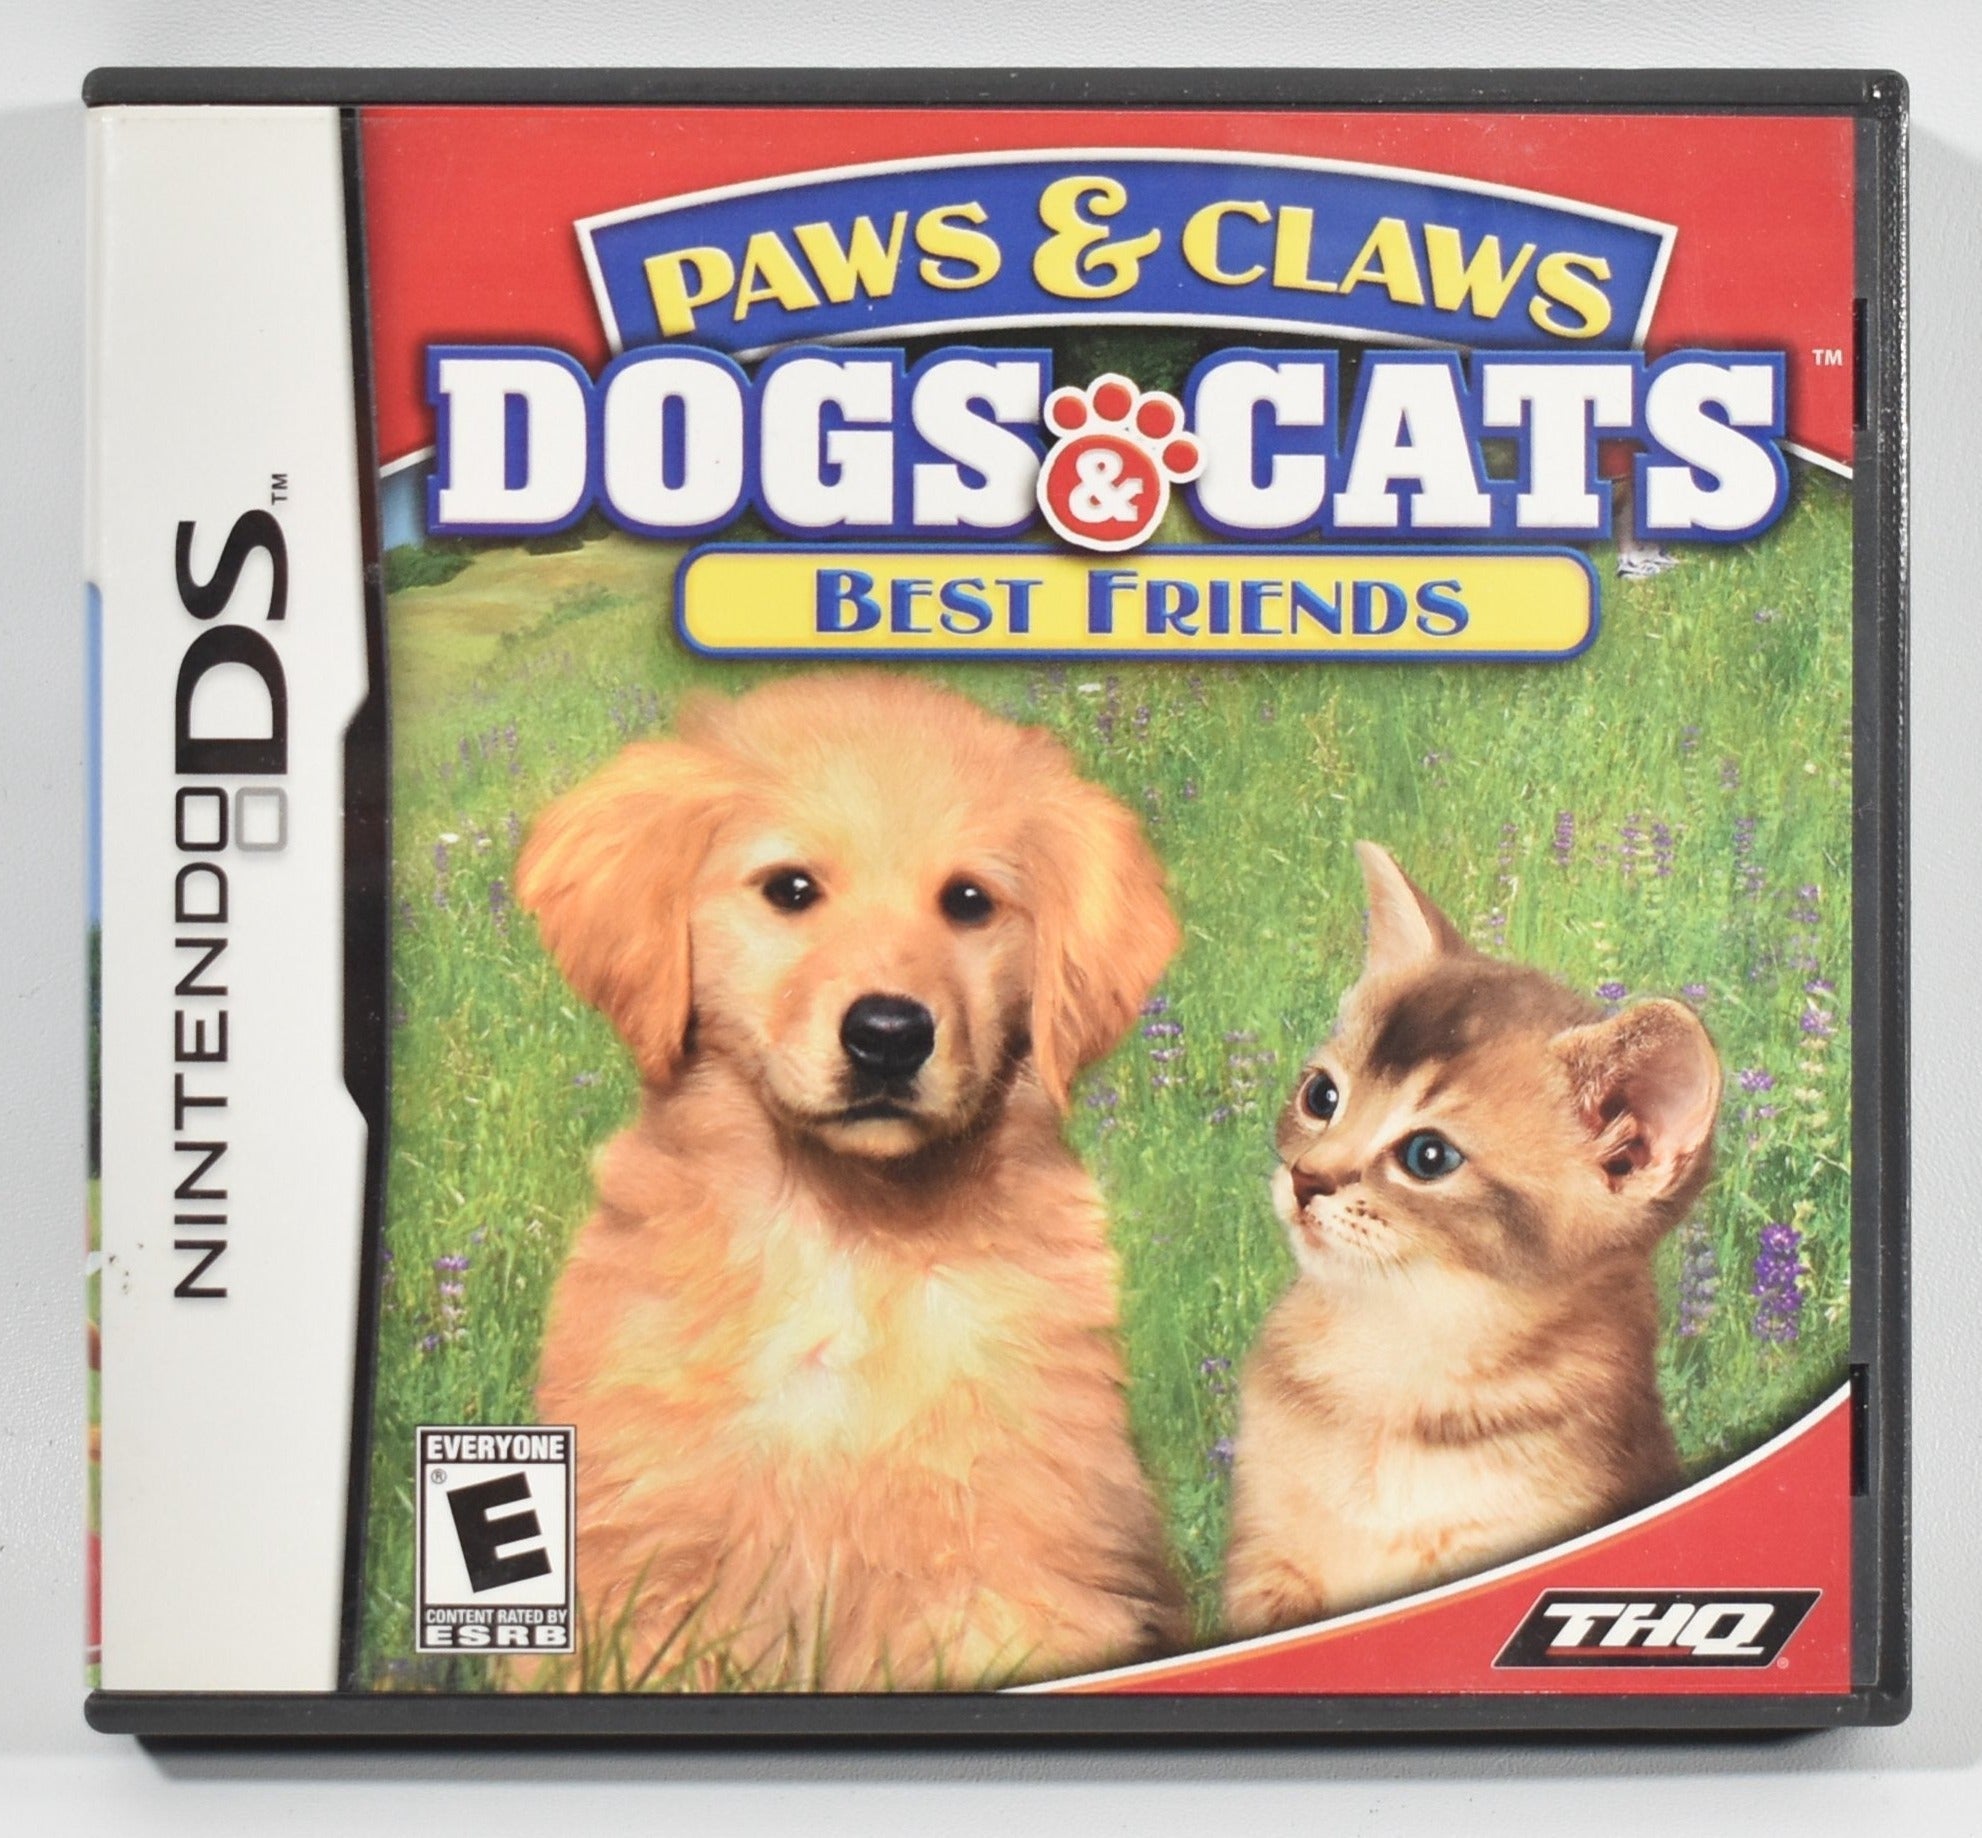 Paws & Claws Dogs & Cats Best Friend Game Nintendo Ds Used